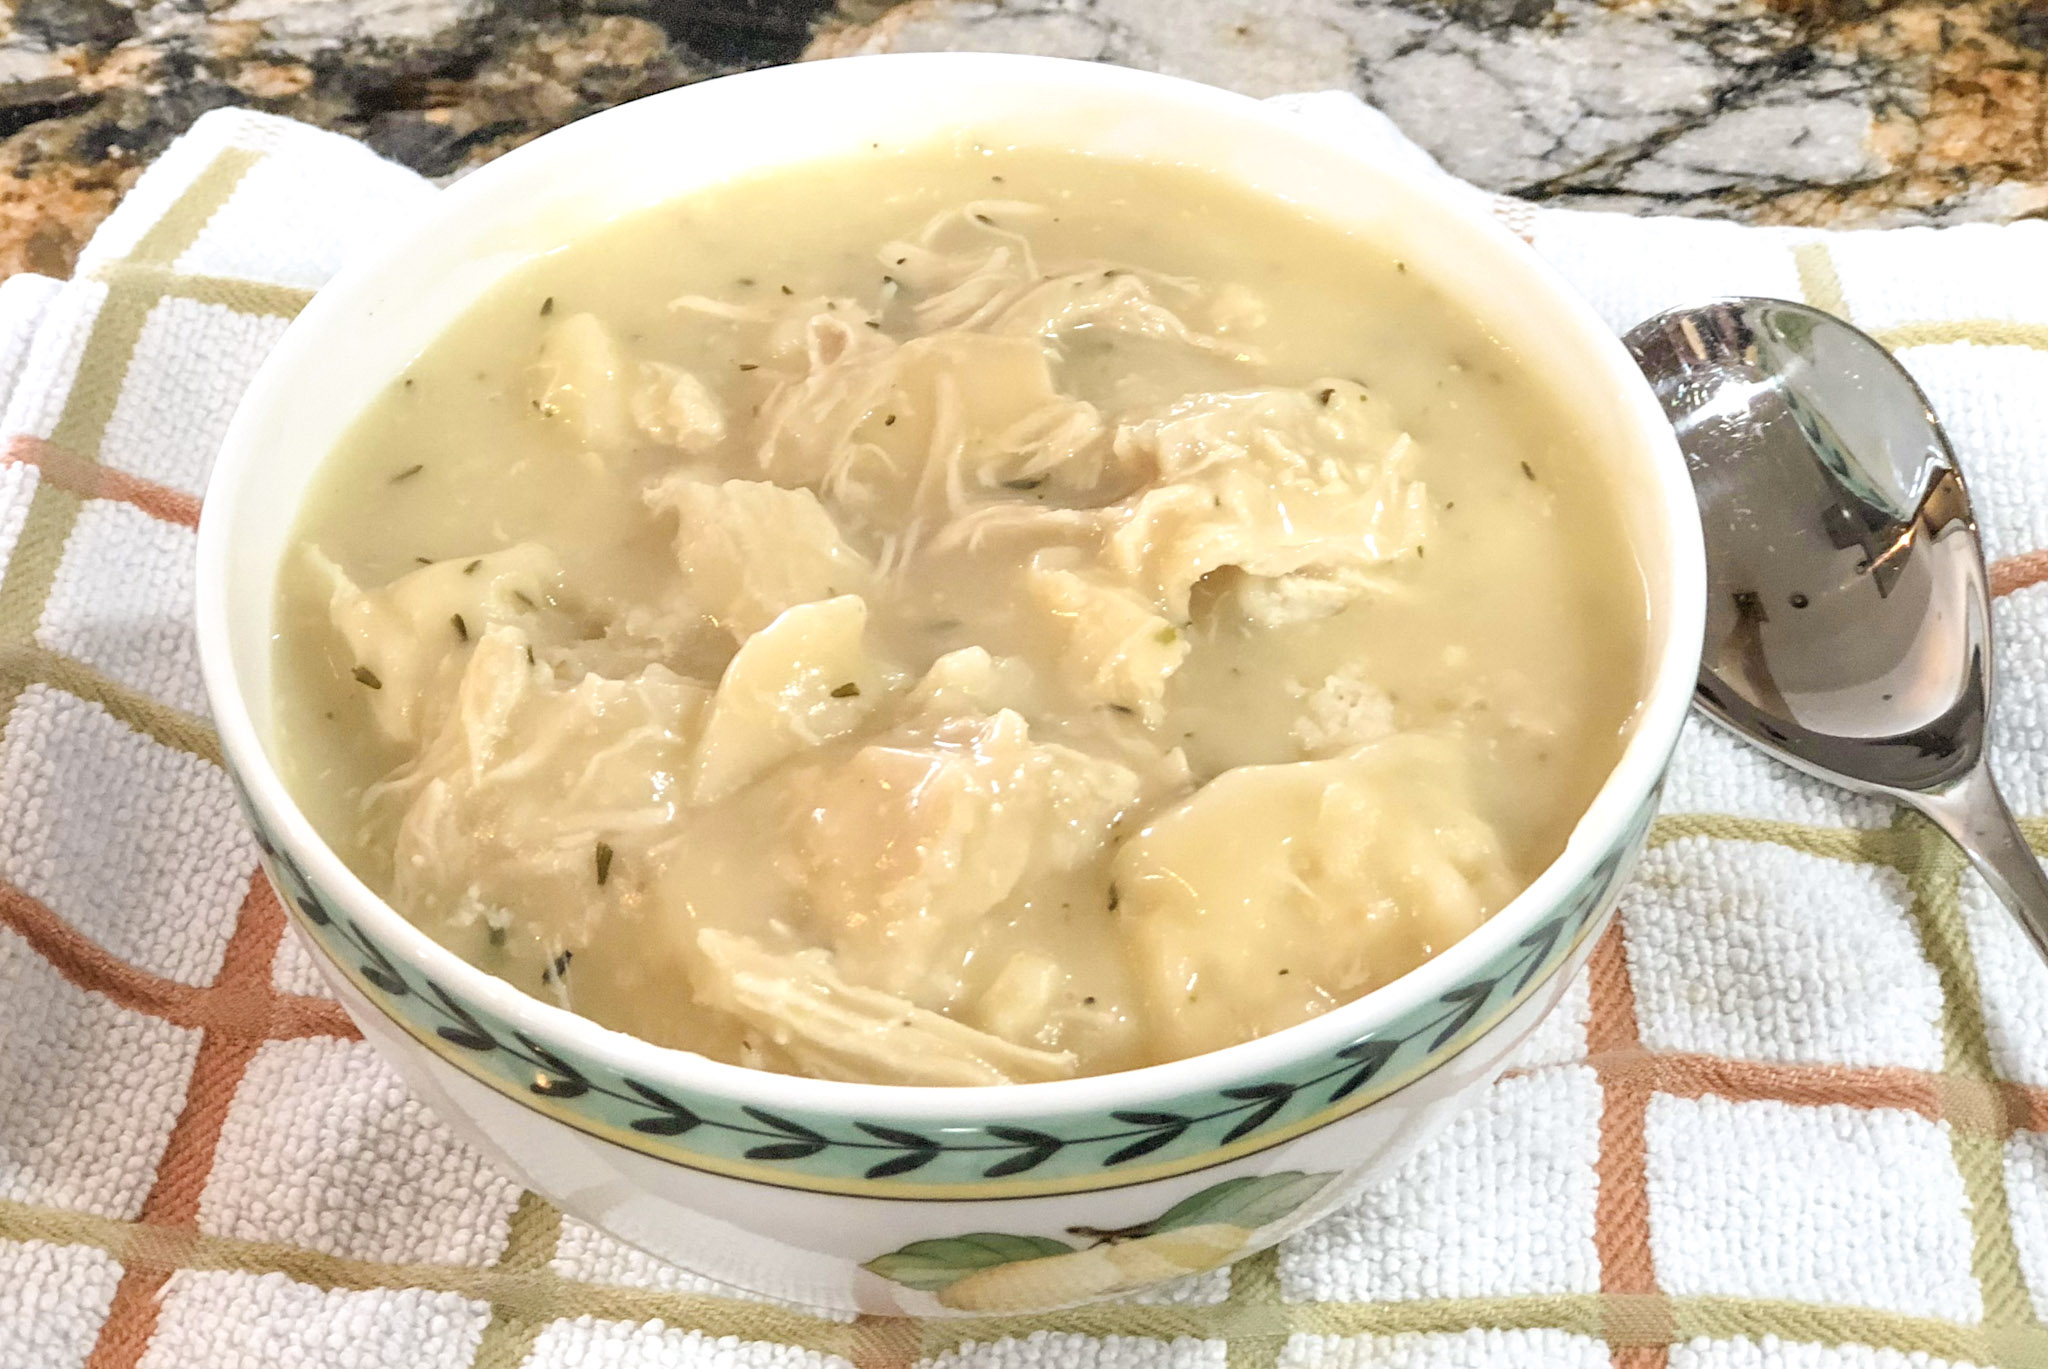 Recipes Chicken And Dumplings Bisquick - Healthy Food Recipes